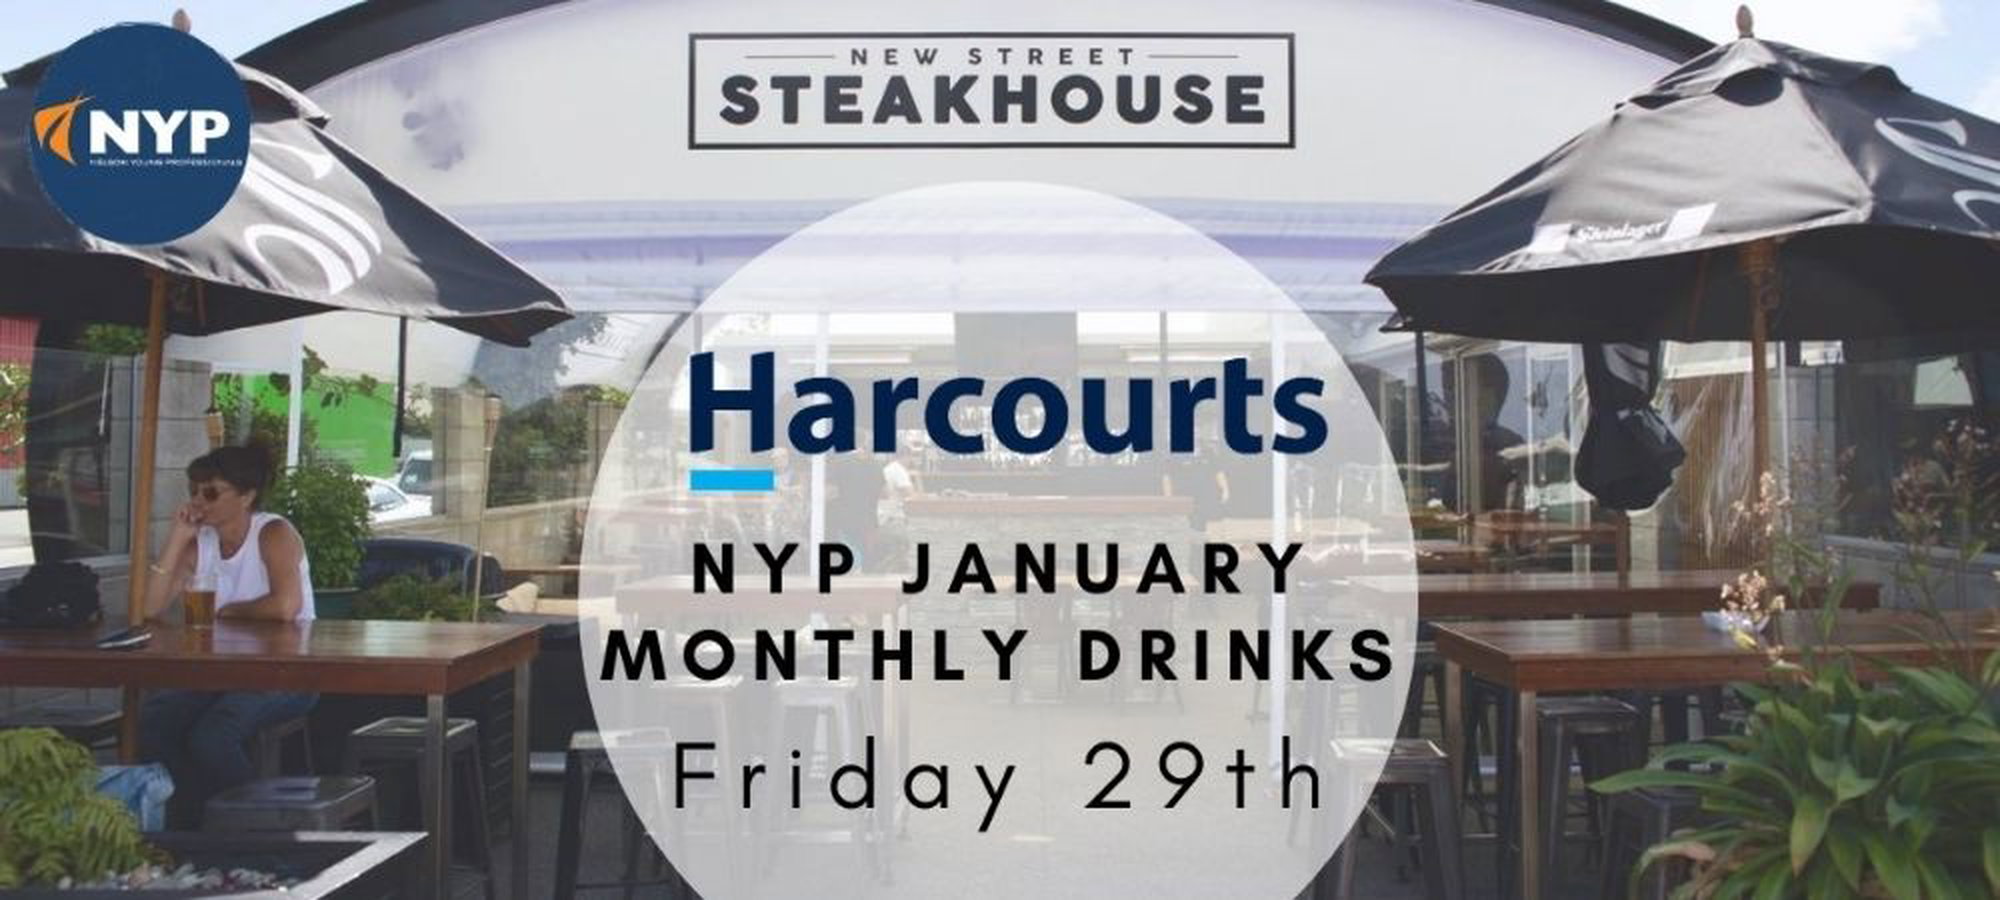 Harcourts NYP January Monthly Drinks